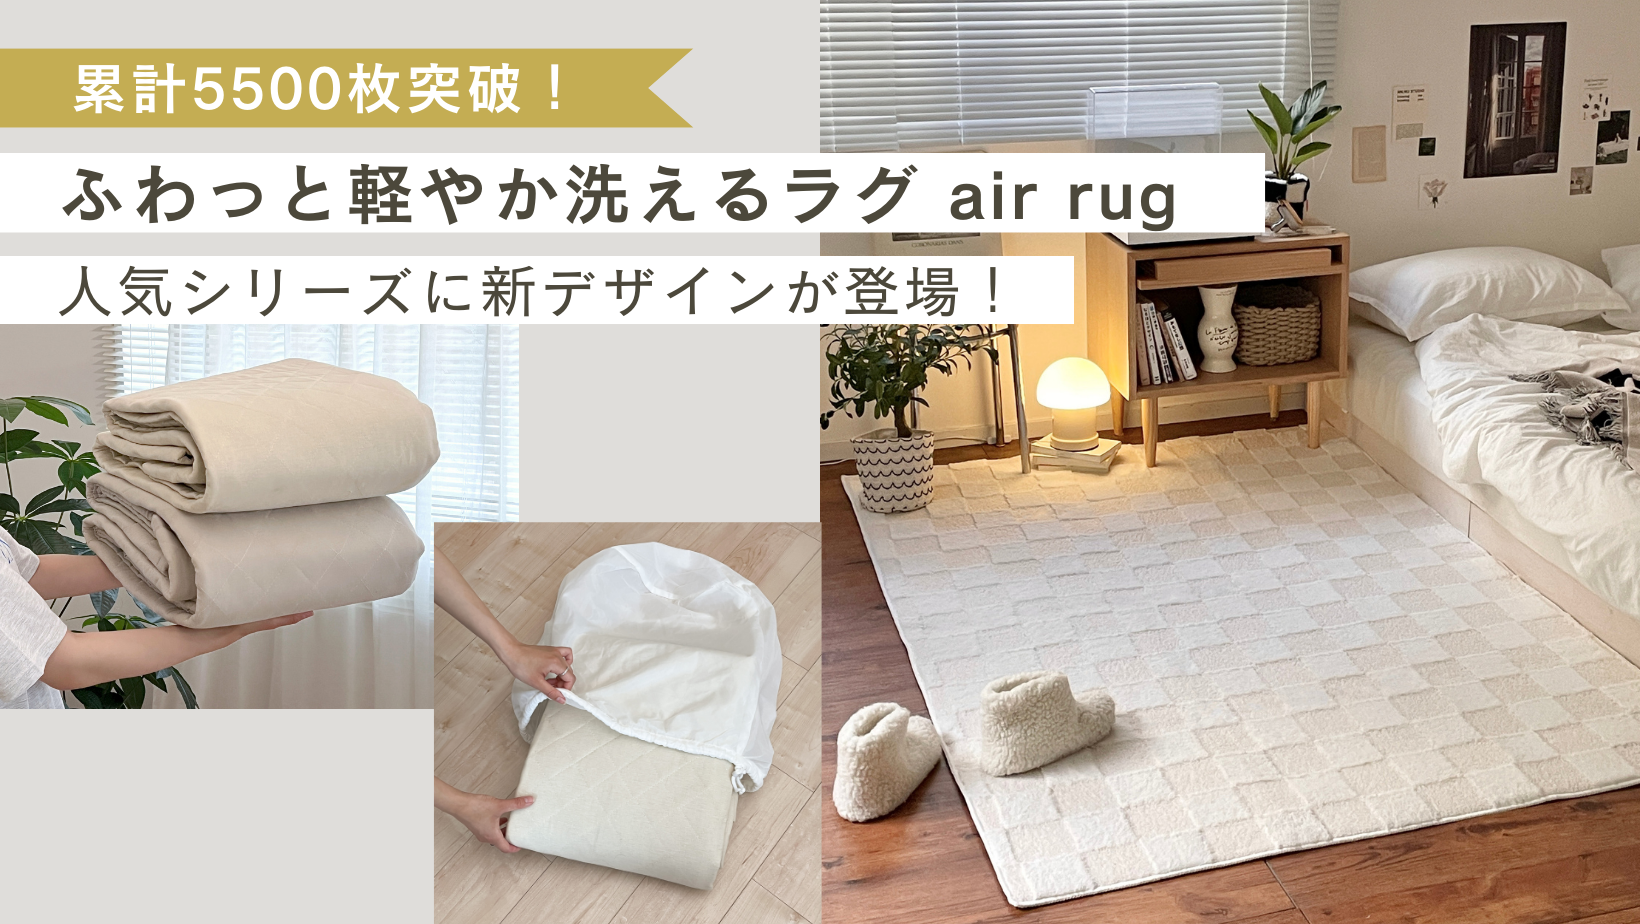 air rug check banner.png__PID:a410c977-252f-4242-a228-ee9973b93a59